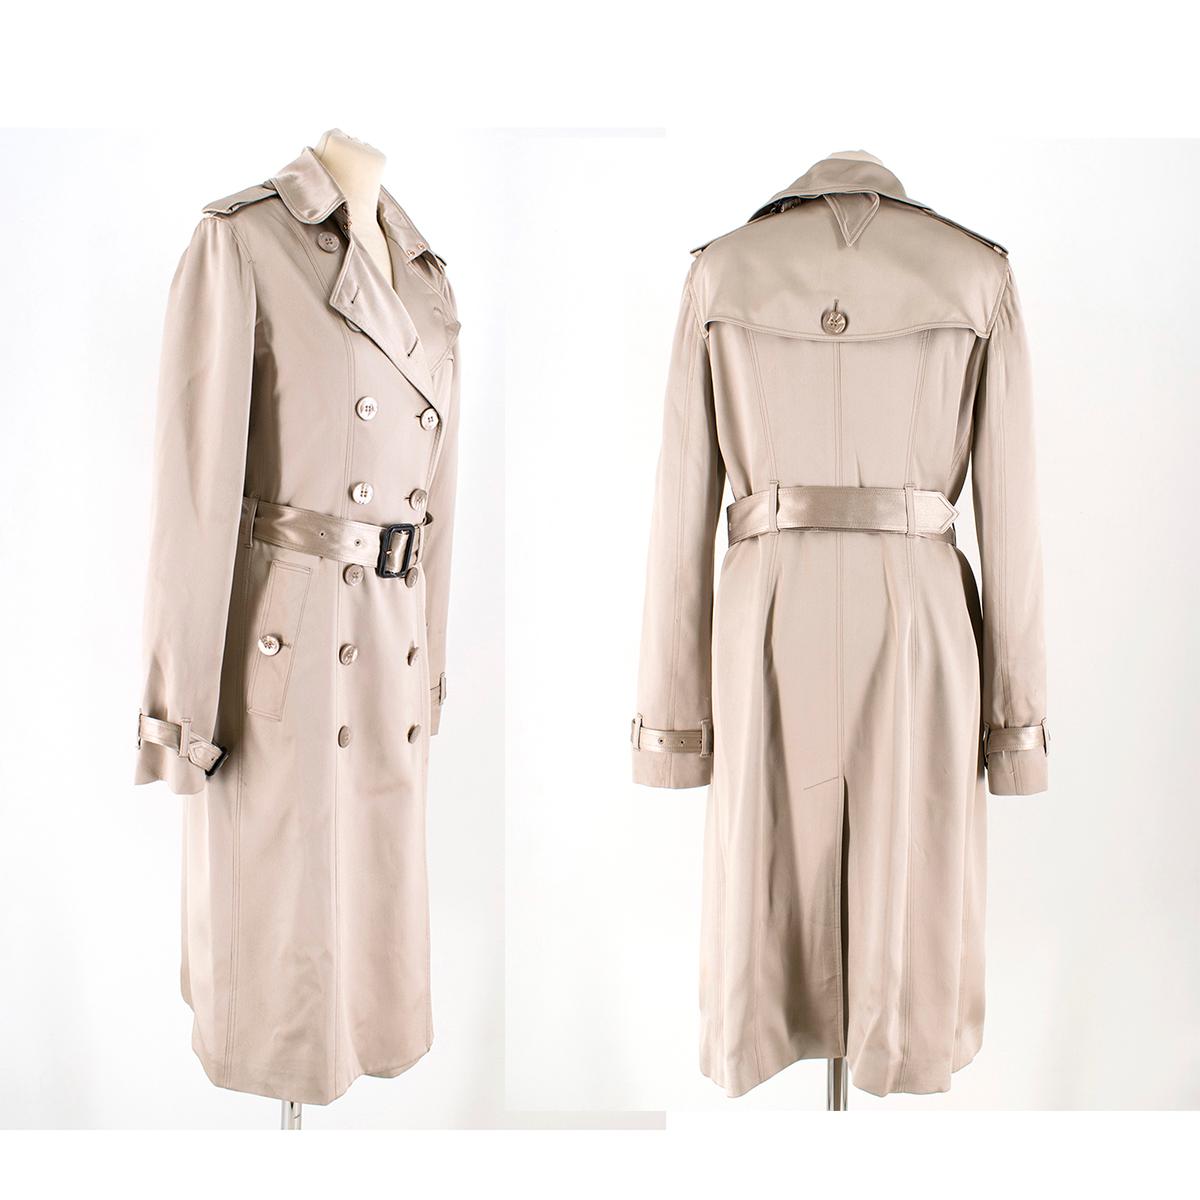 Burberry Metallic Nude Silk Double-Breasted Wrap Trench Coat

- Metallic nude, silk trench coat
- Double-breasted buttoned fastening closu
- Adjustable buckle strap at cuffs
- Side buttoned pockets
- Adjustable waist belt with black leather buckle
-